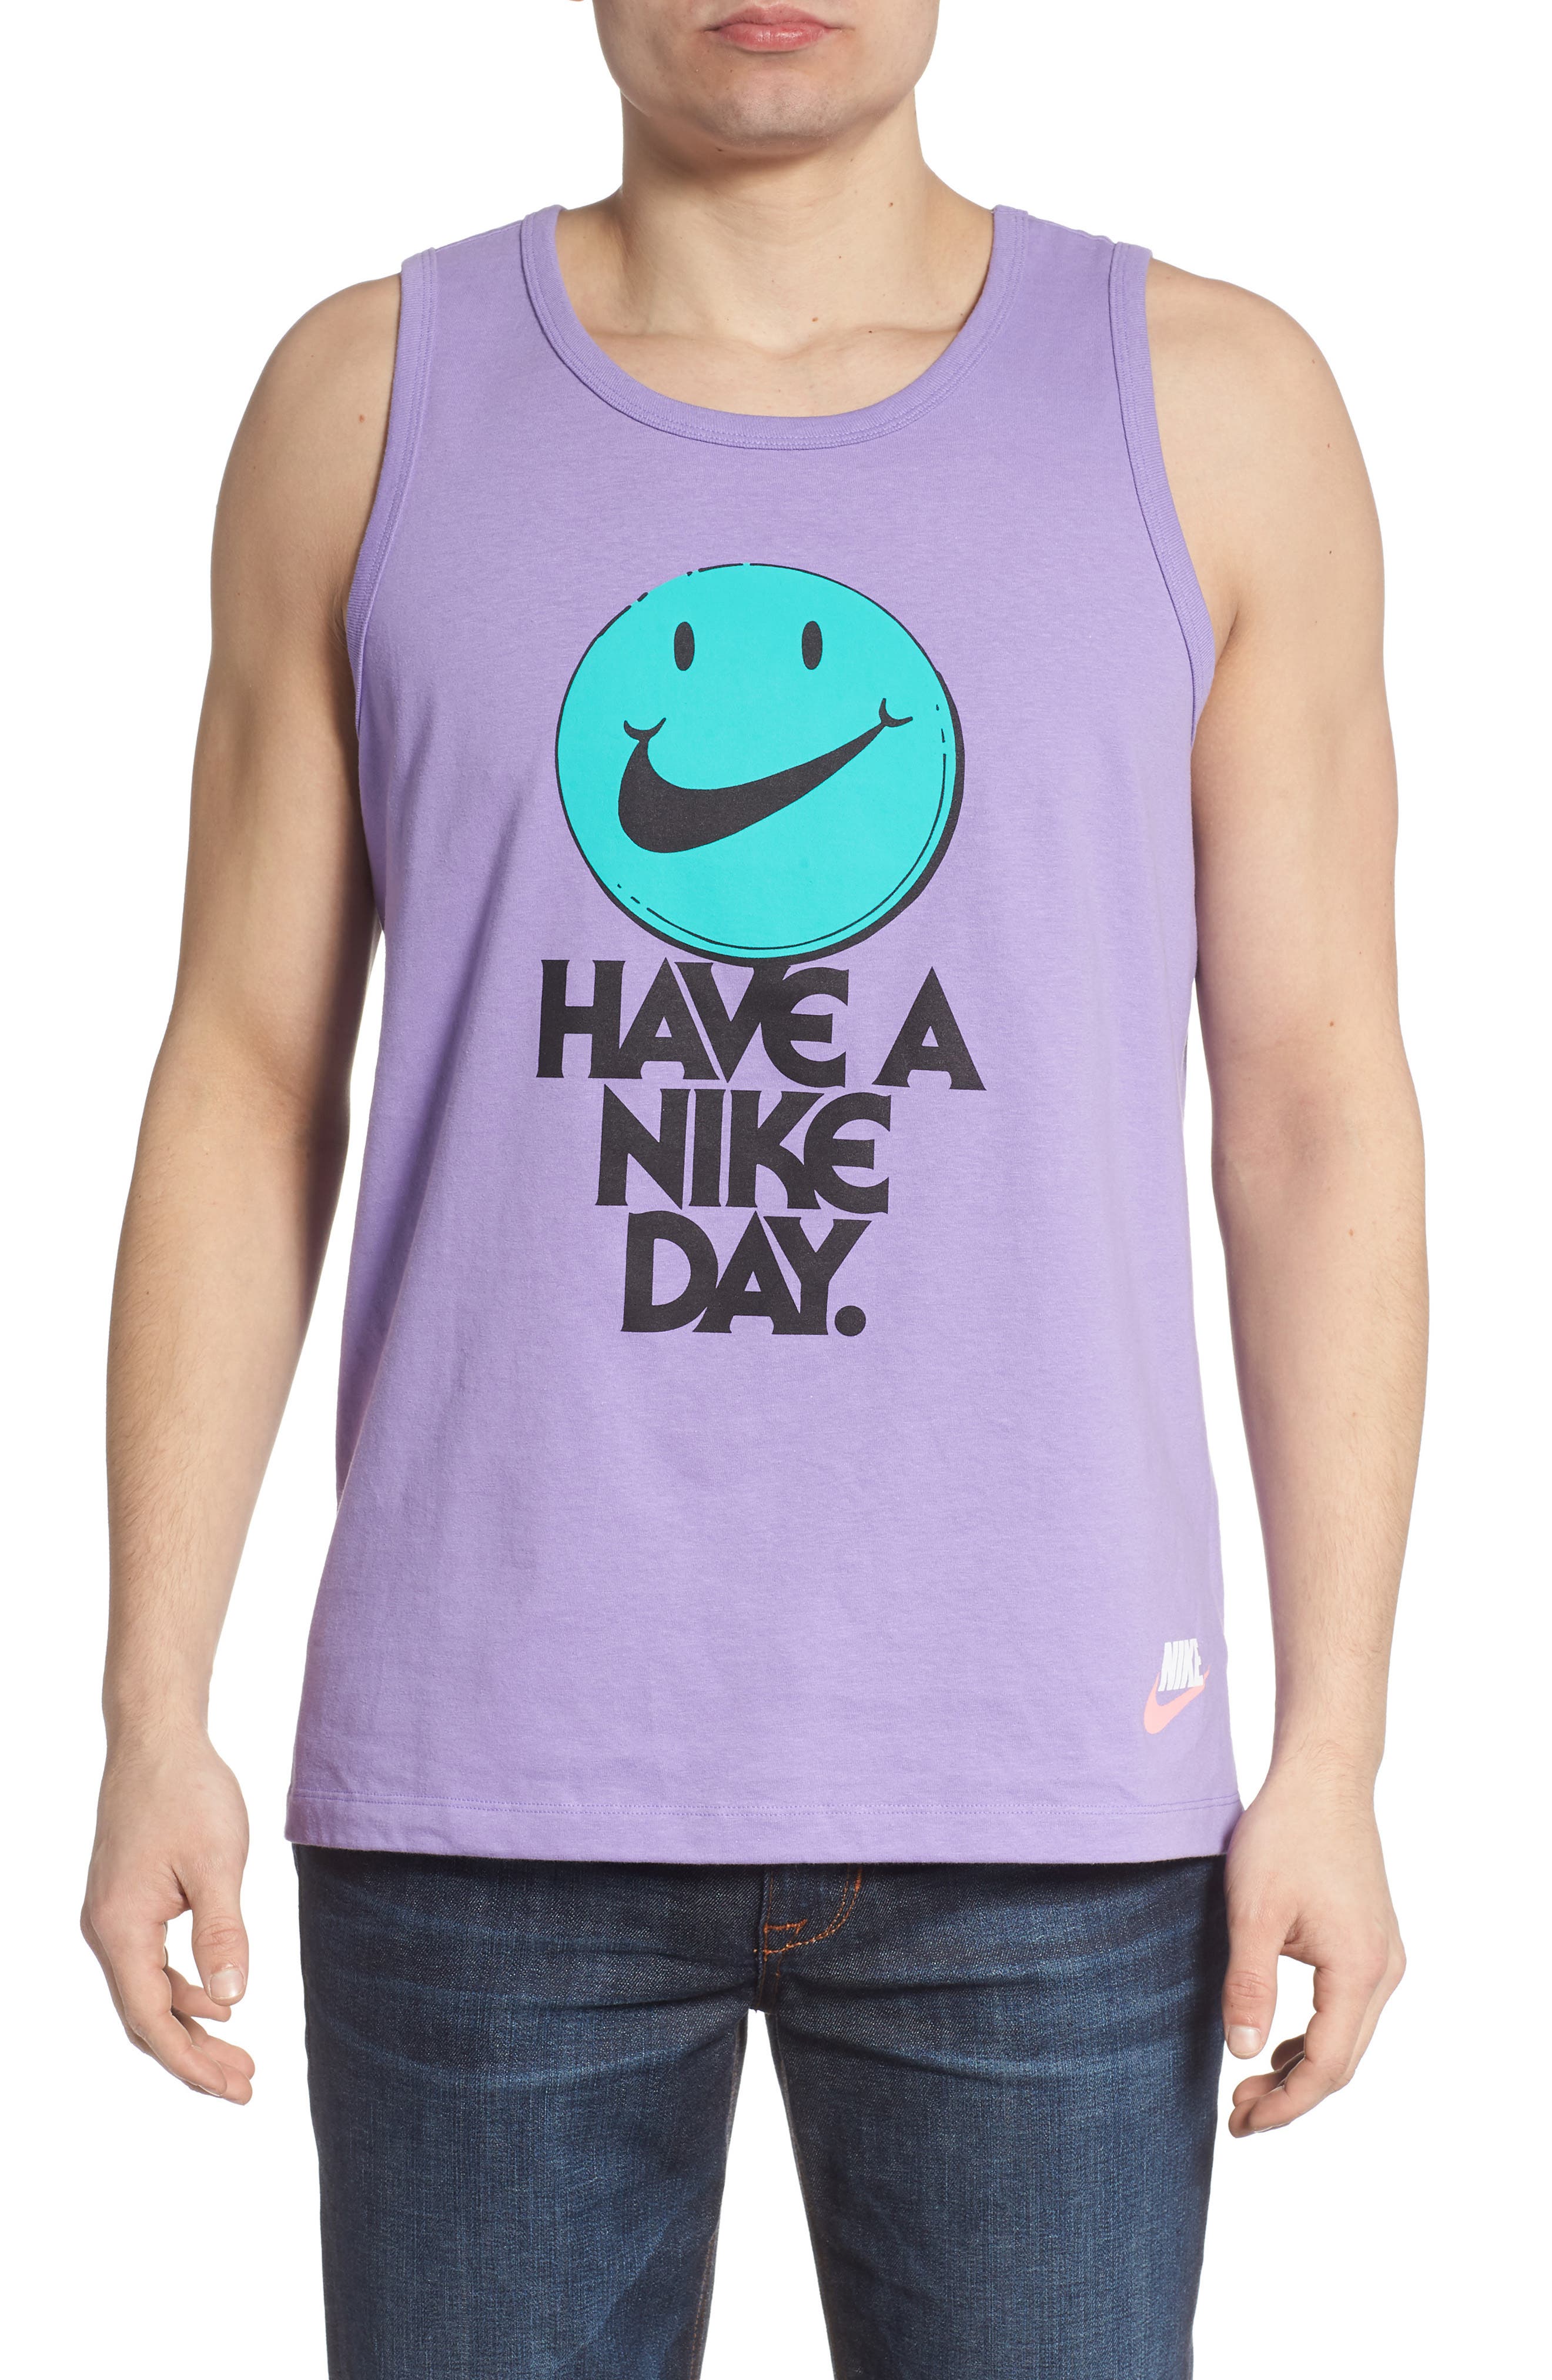 nike have a nike day shirt